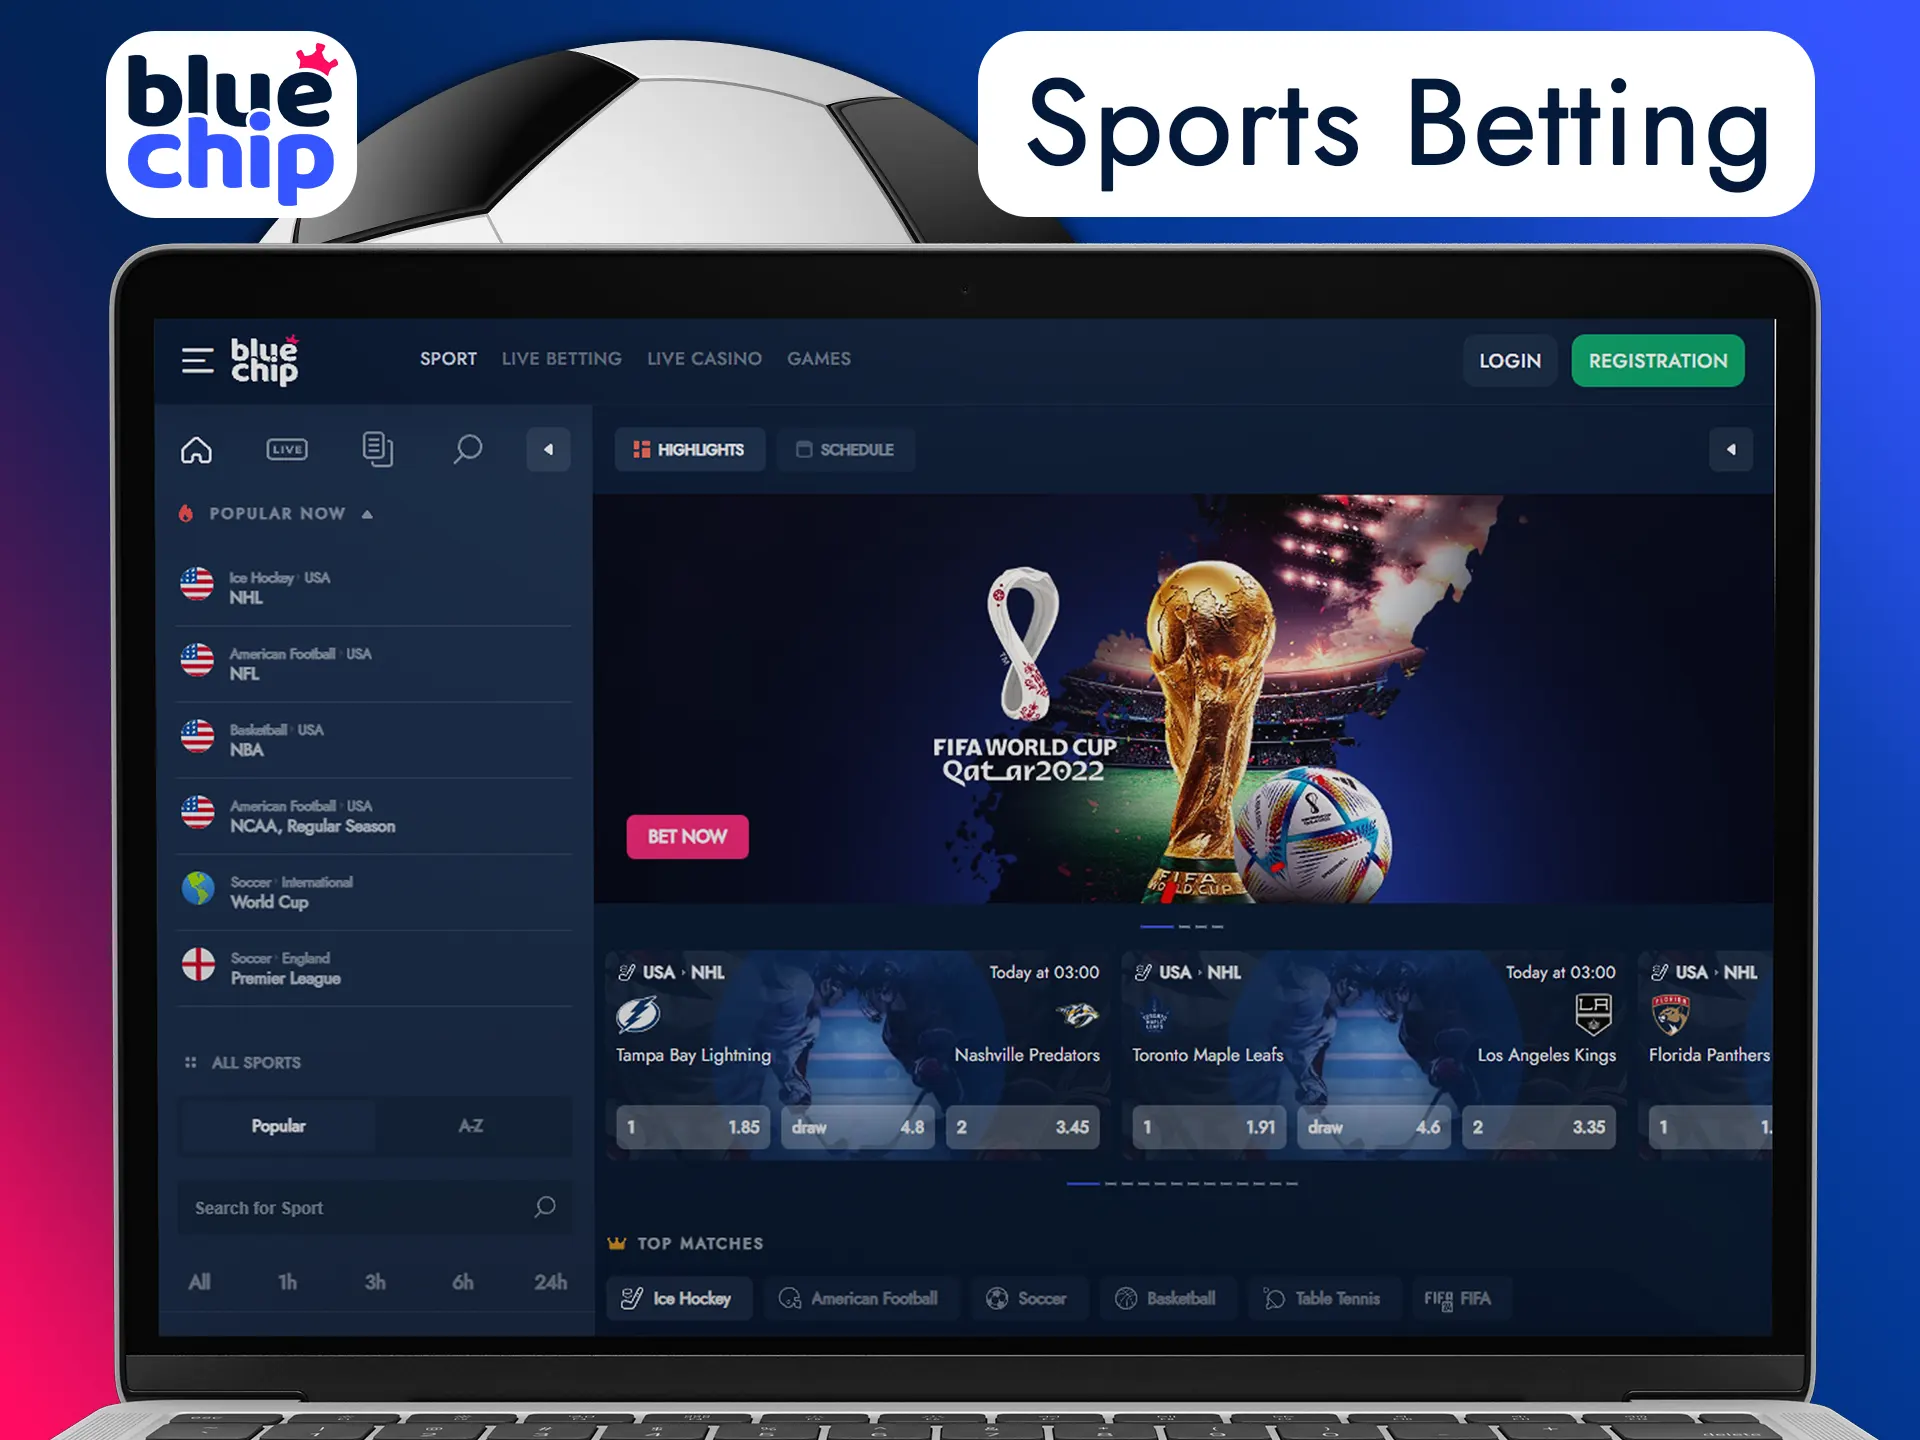 Bet on main sport events at Bluechip.